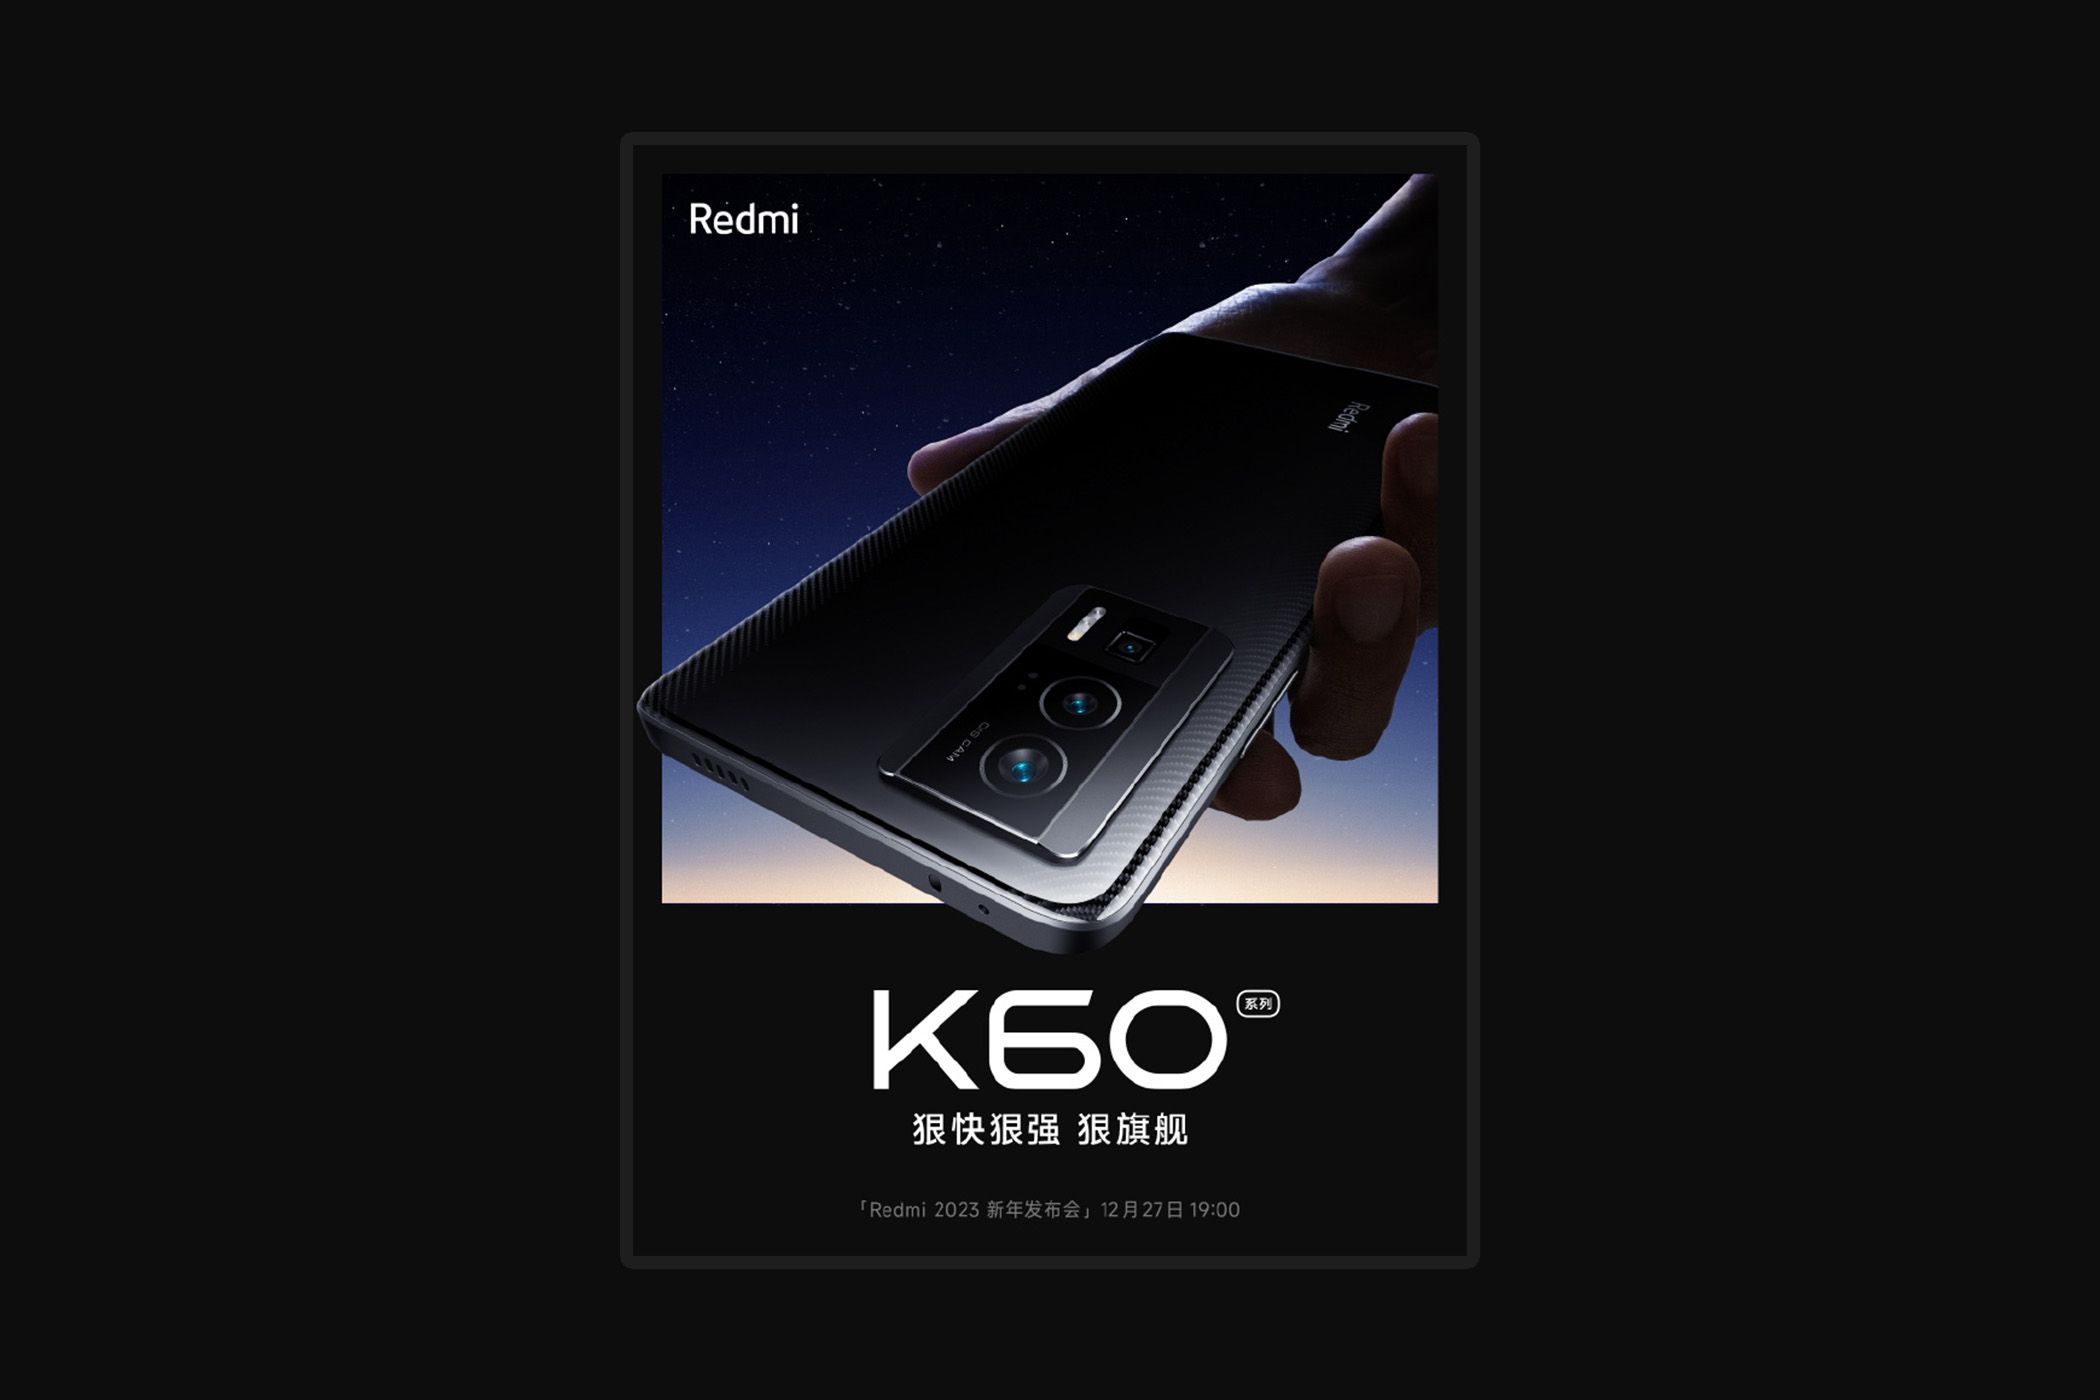 Redmi K60 series launch announcement poster on gray background.